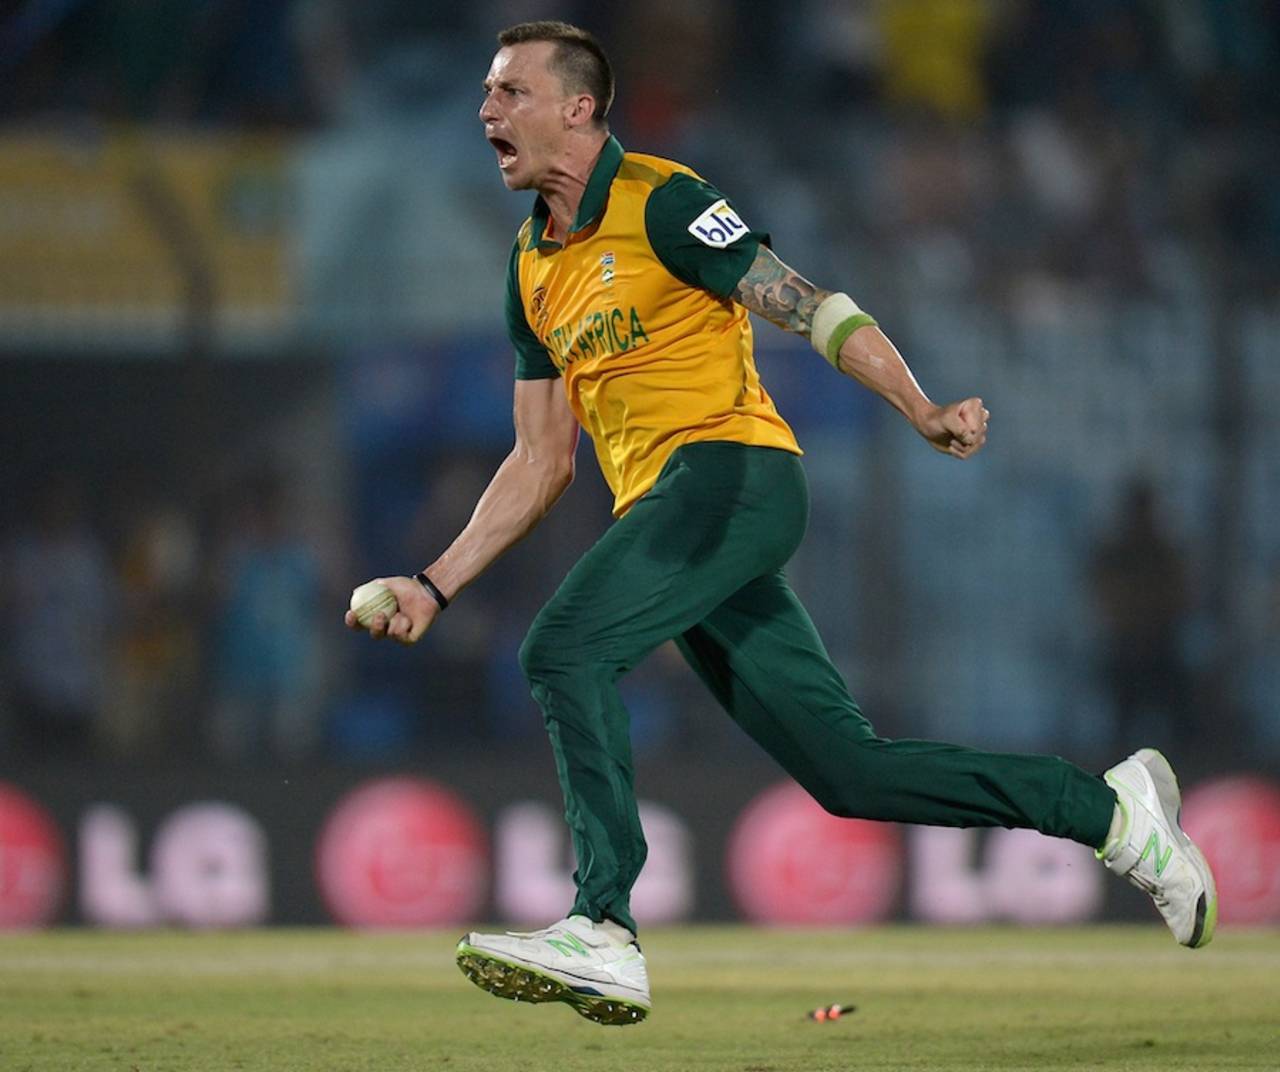 Dale Steyn enacted one of the most exultant exits from a sporting stage after dismantling New Zealand&nbsp;&nbsp;&bull;&nbsp;&nbsp;Getty Images